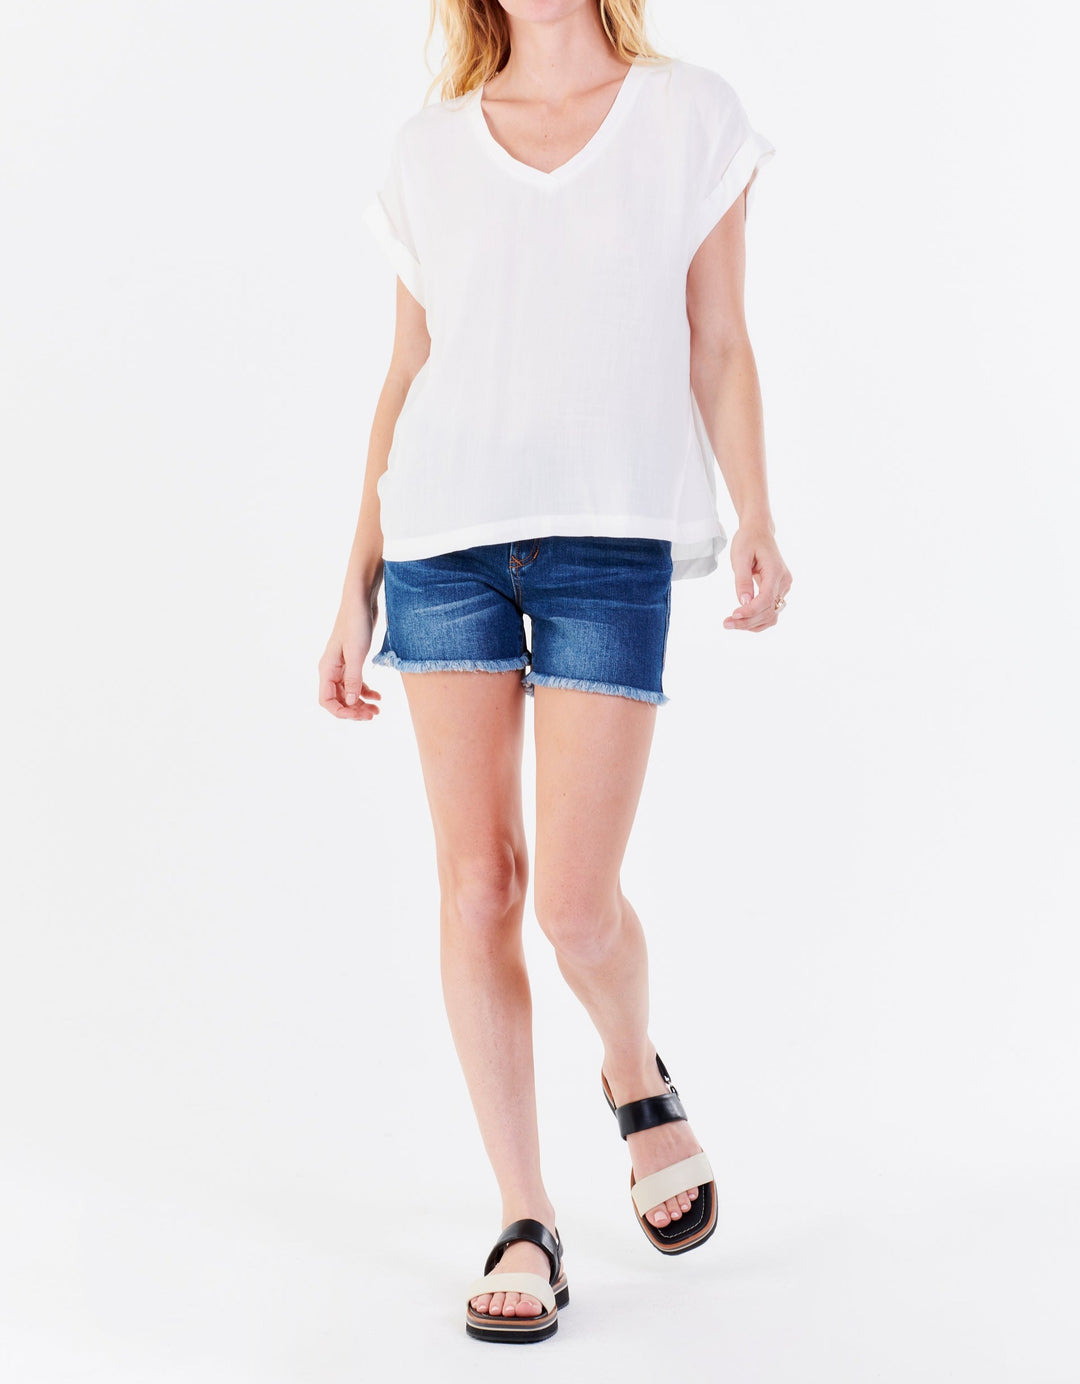 image of a female model wearing a CAMILA DROP SHOULDER TOP WHITE TOPS